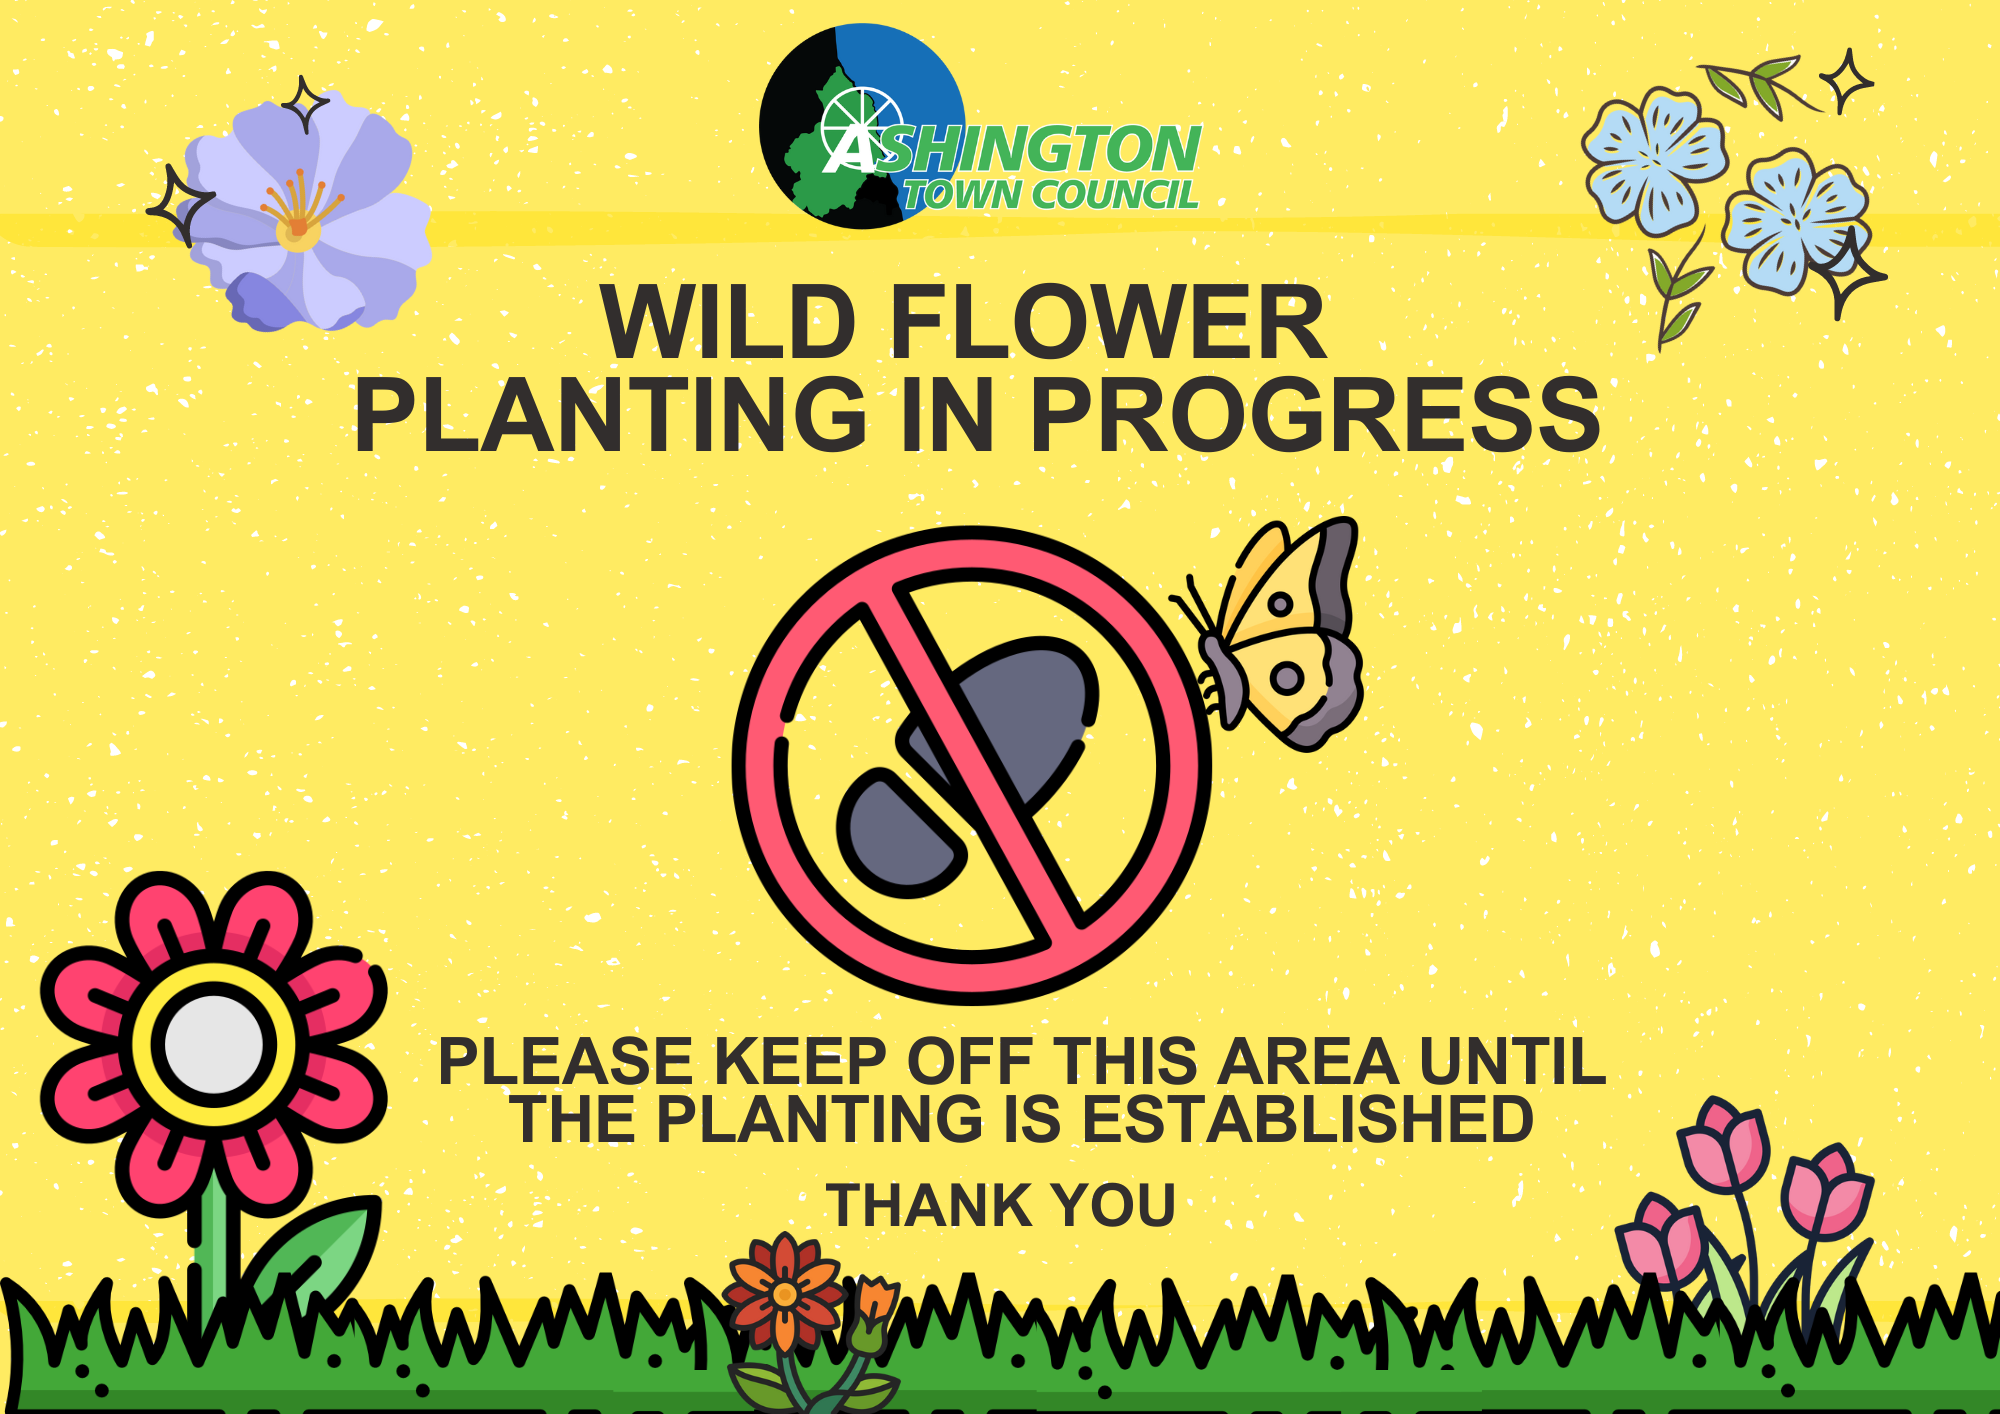 Town and County Councils Partner to Bring Wildflowers to Ashington Green Spaces